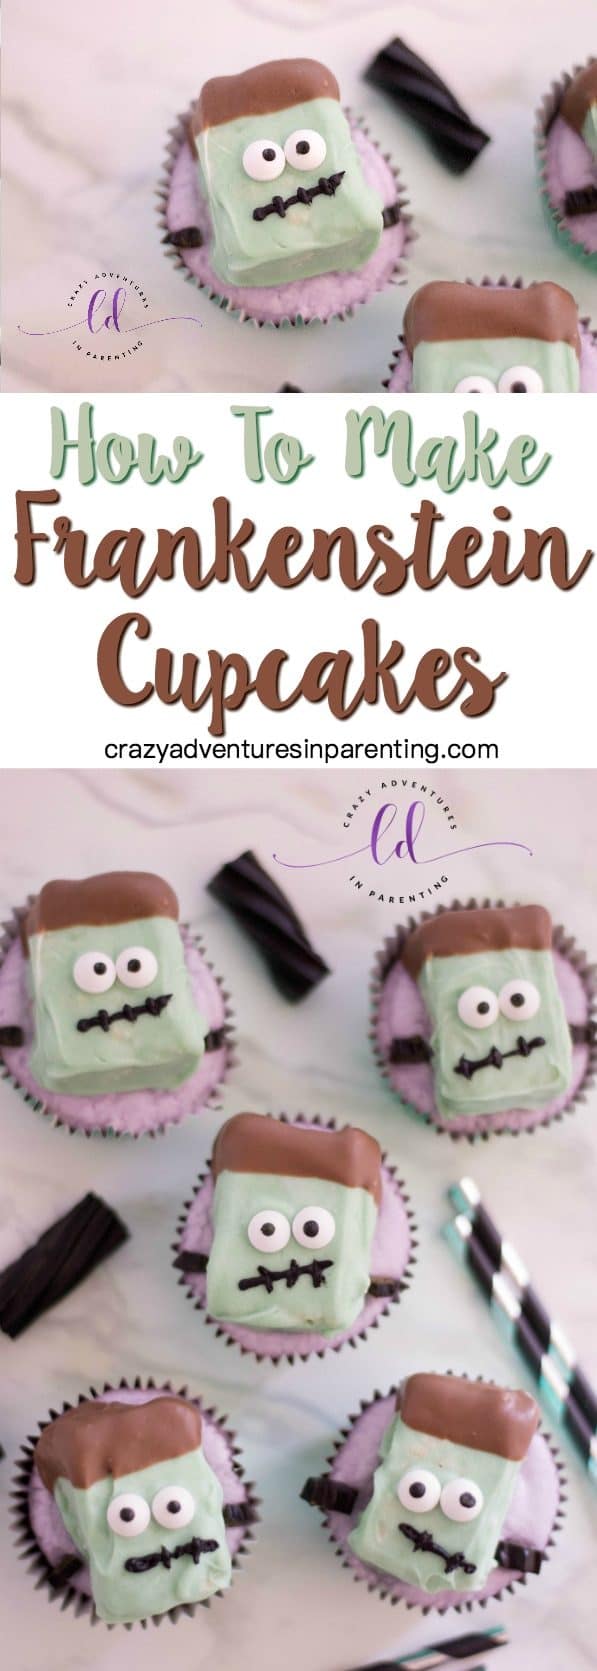 How to Make Frankenstein Cupcakes